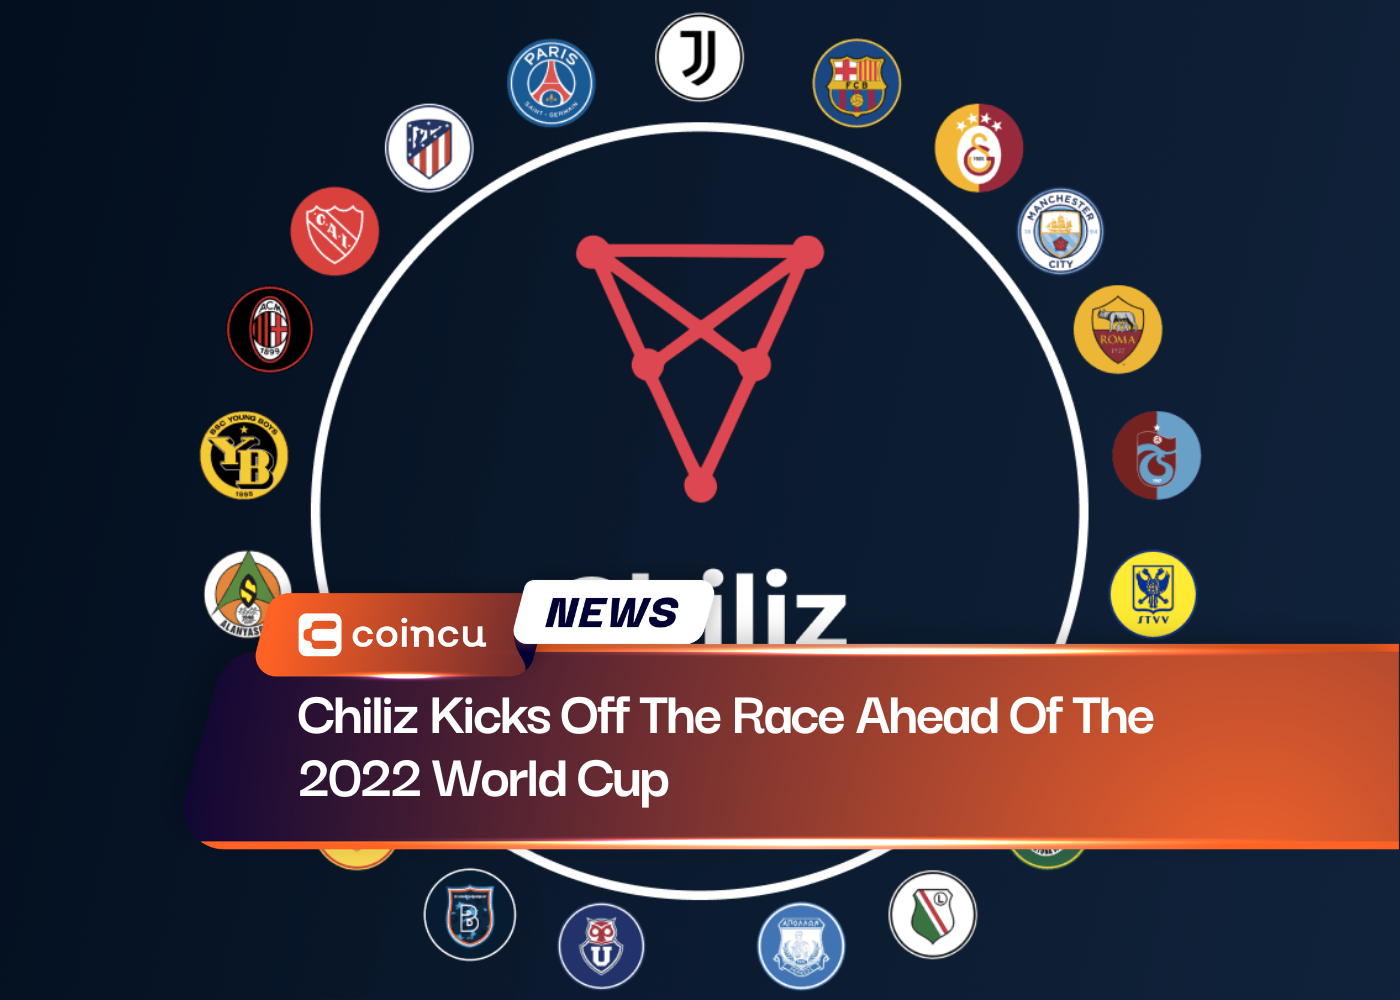 Chiliz Kicks Off The Race Ahead Of The 2022 World Cup